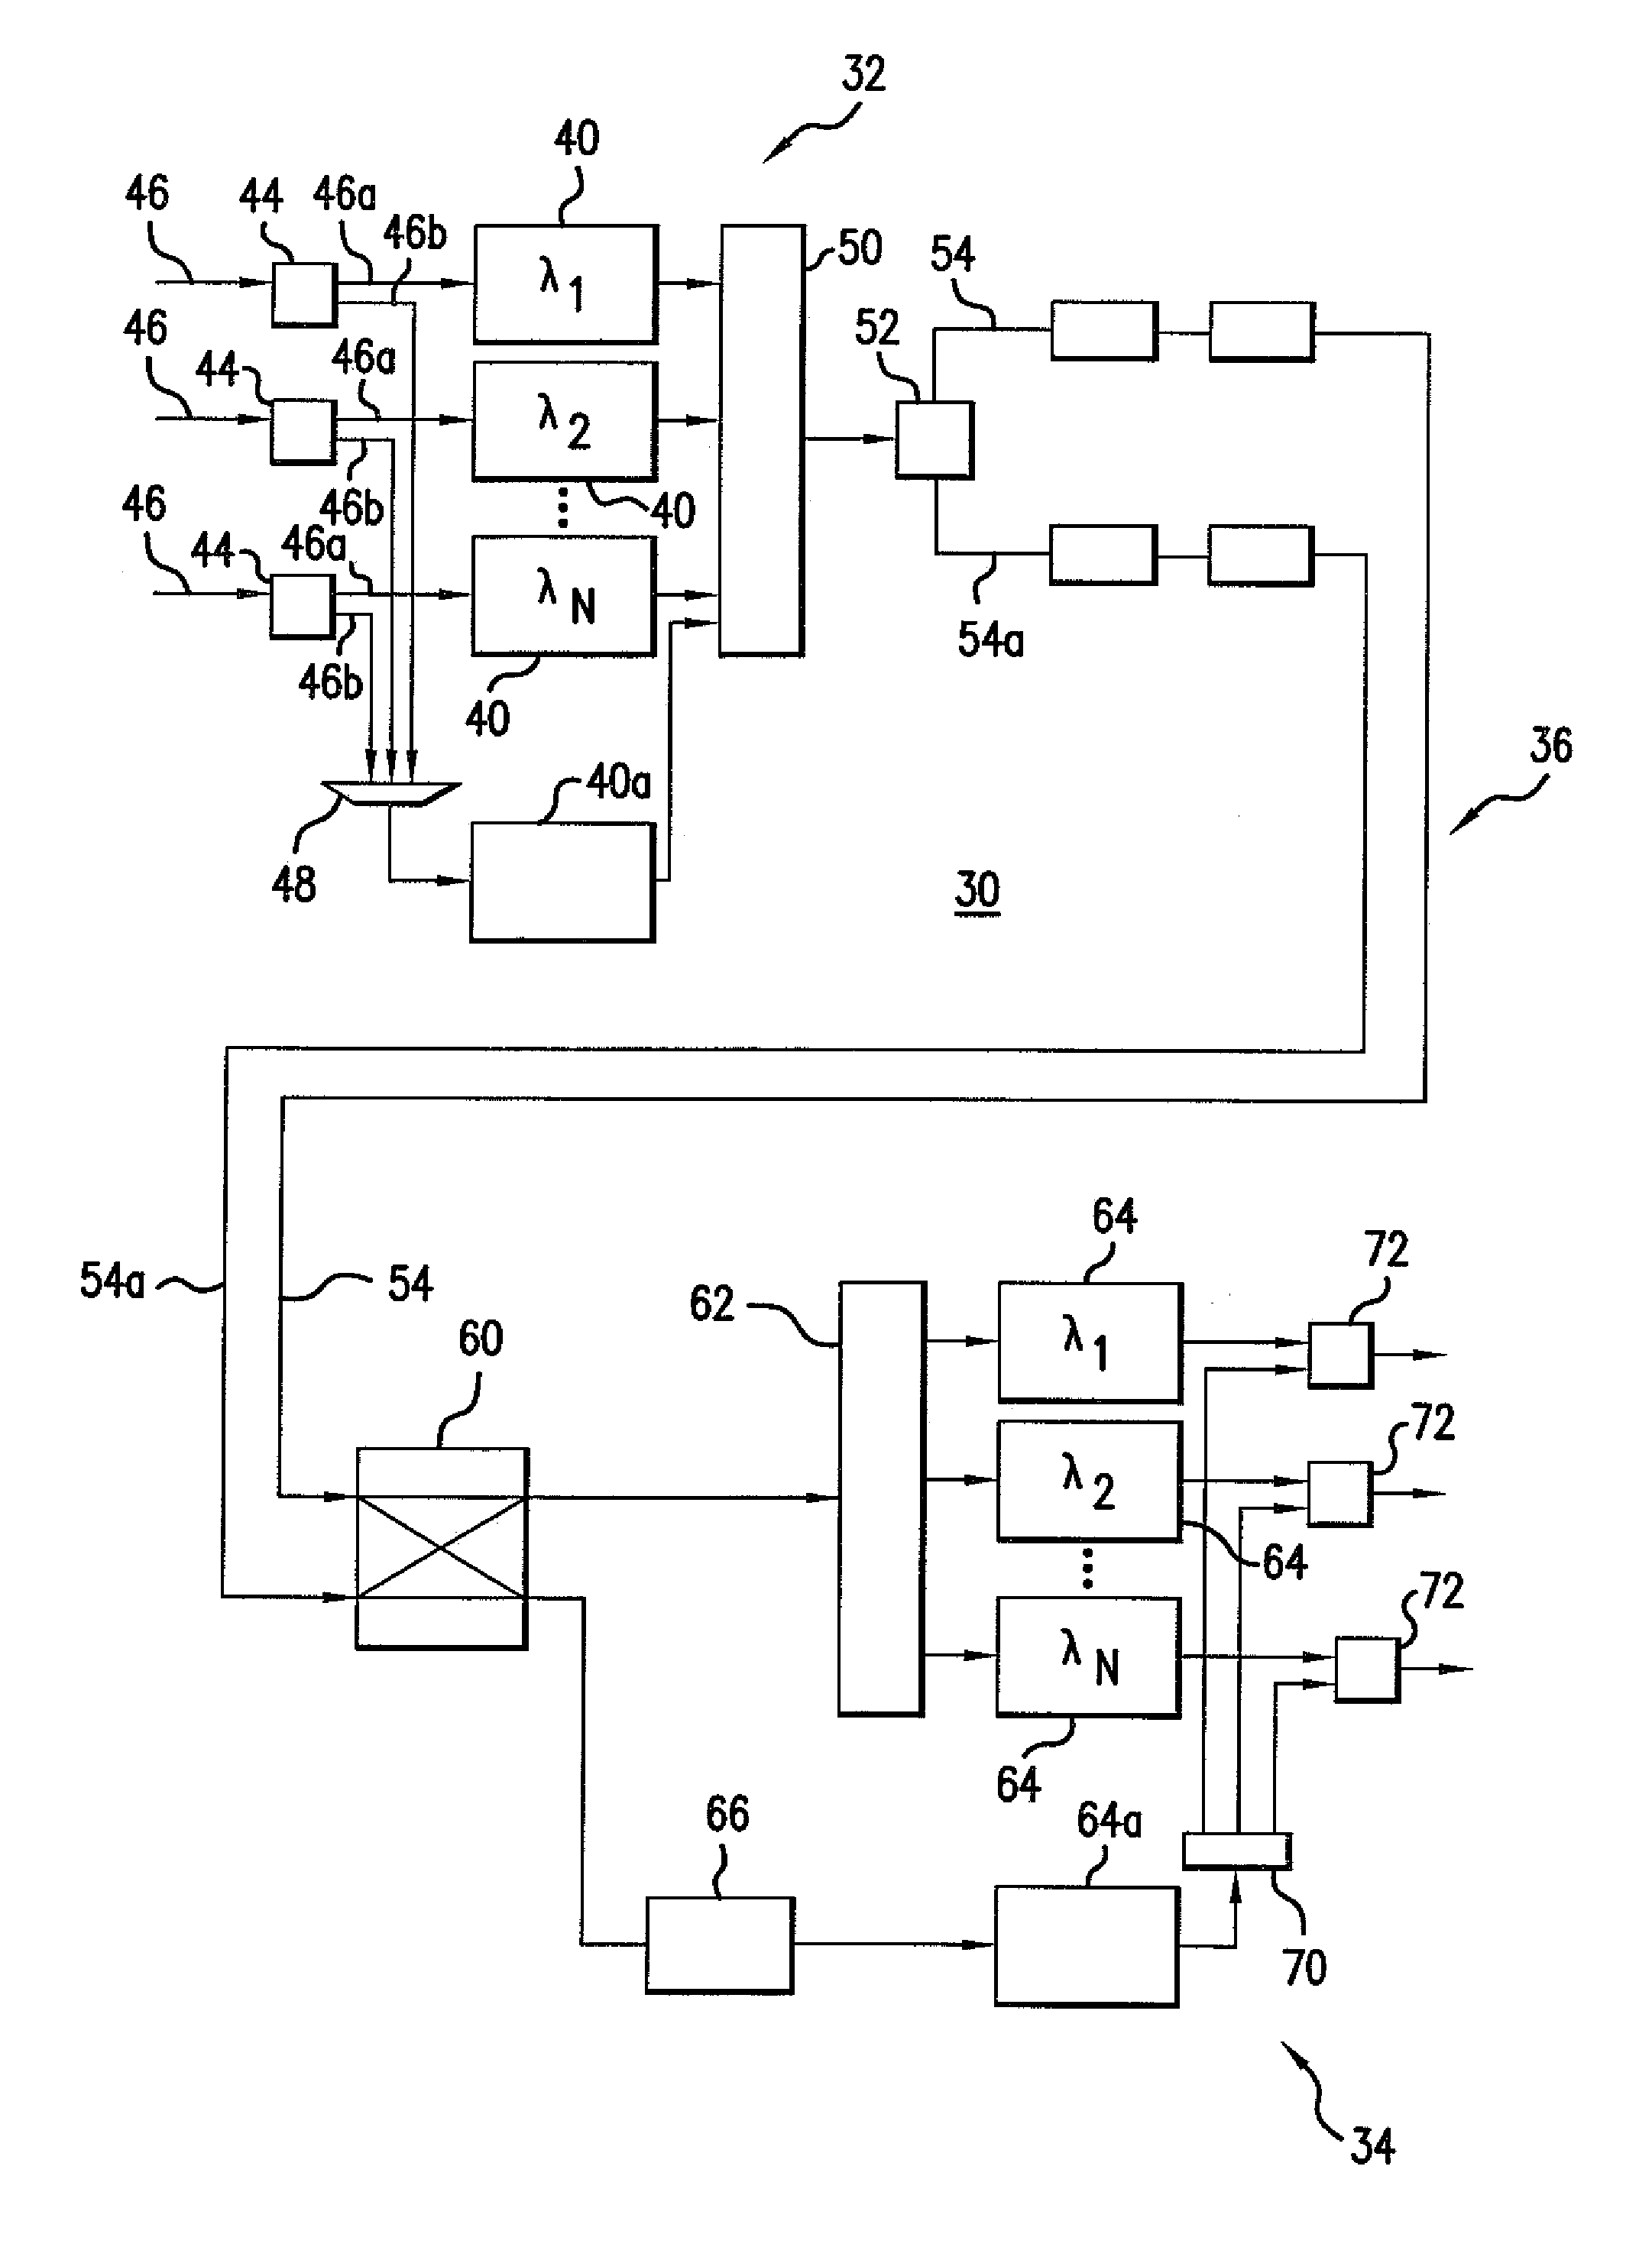 Protection switching architecture and method of use